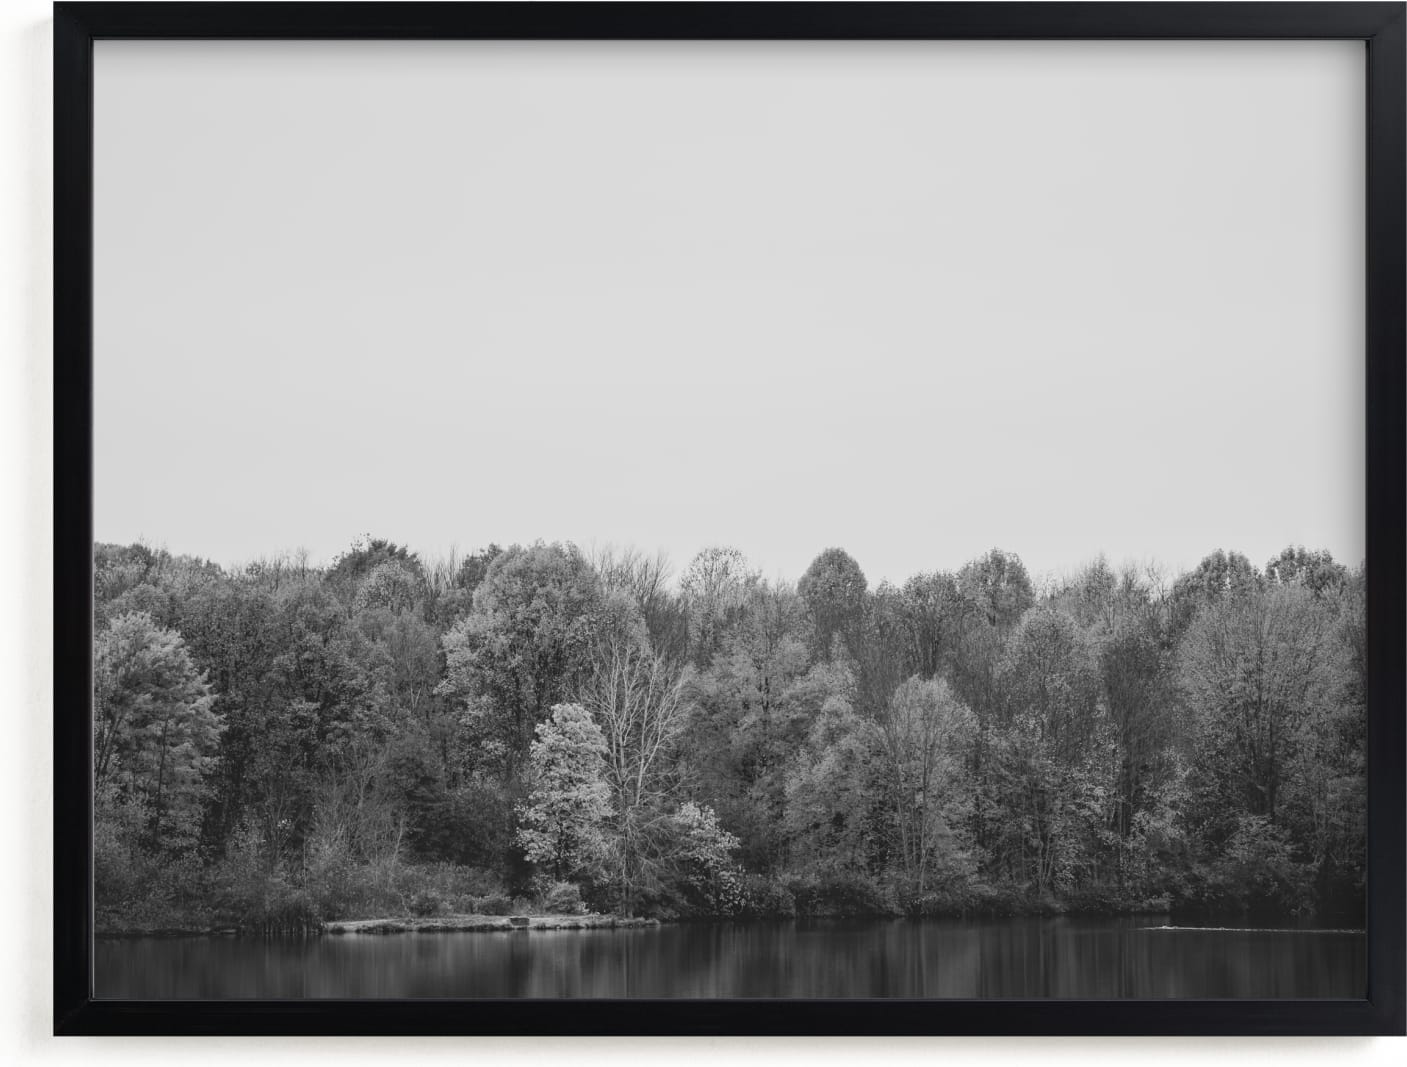 This is a black and white art by Robin Ott called lake side.